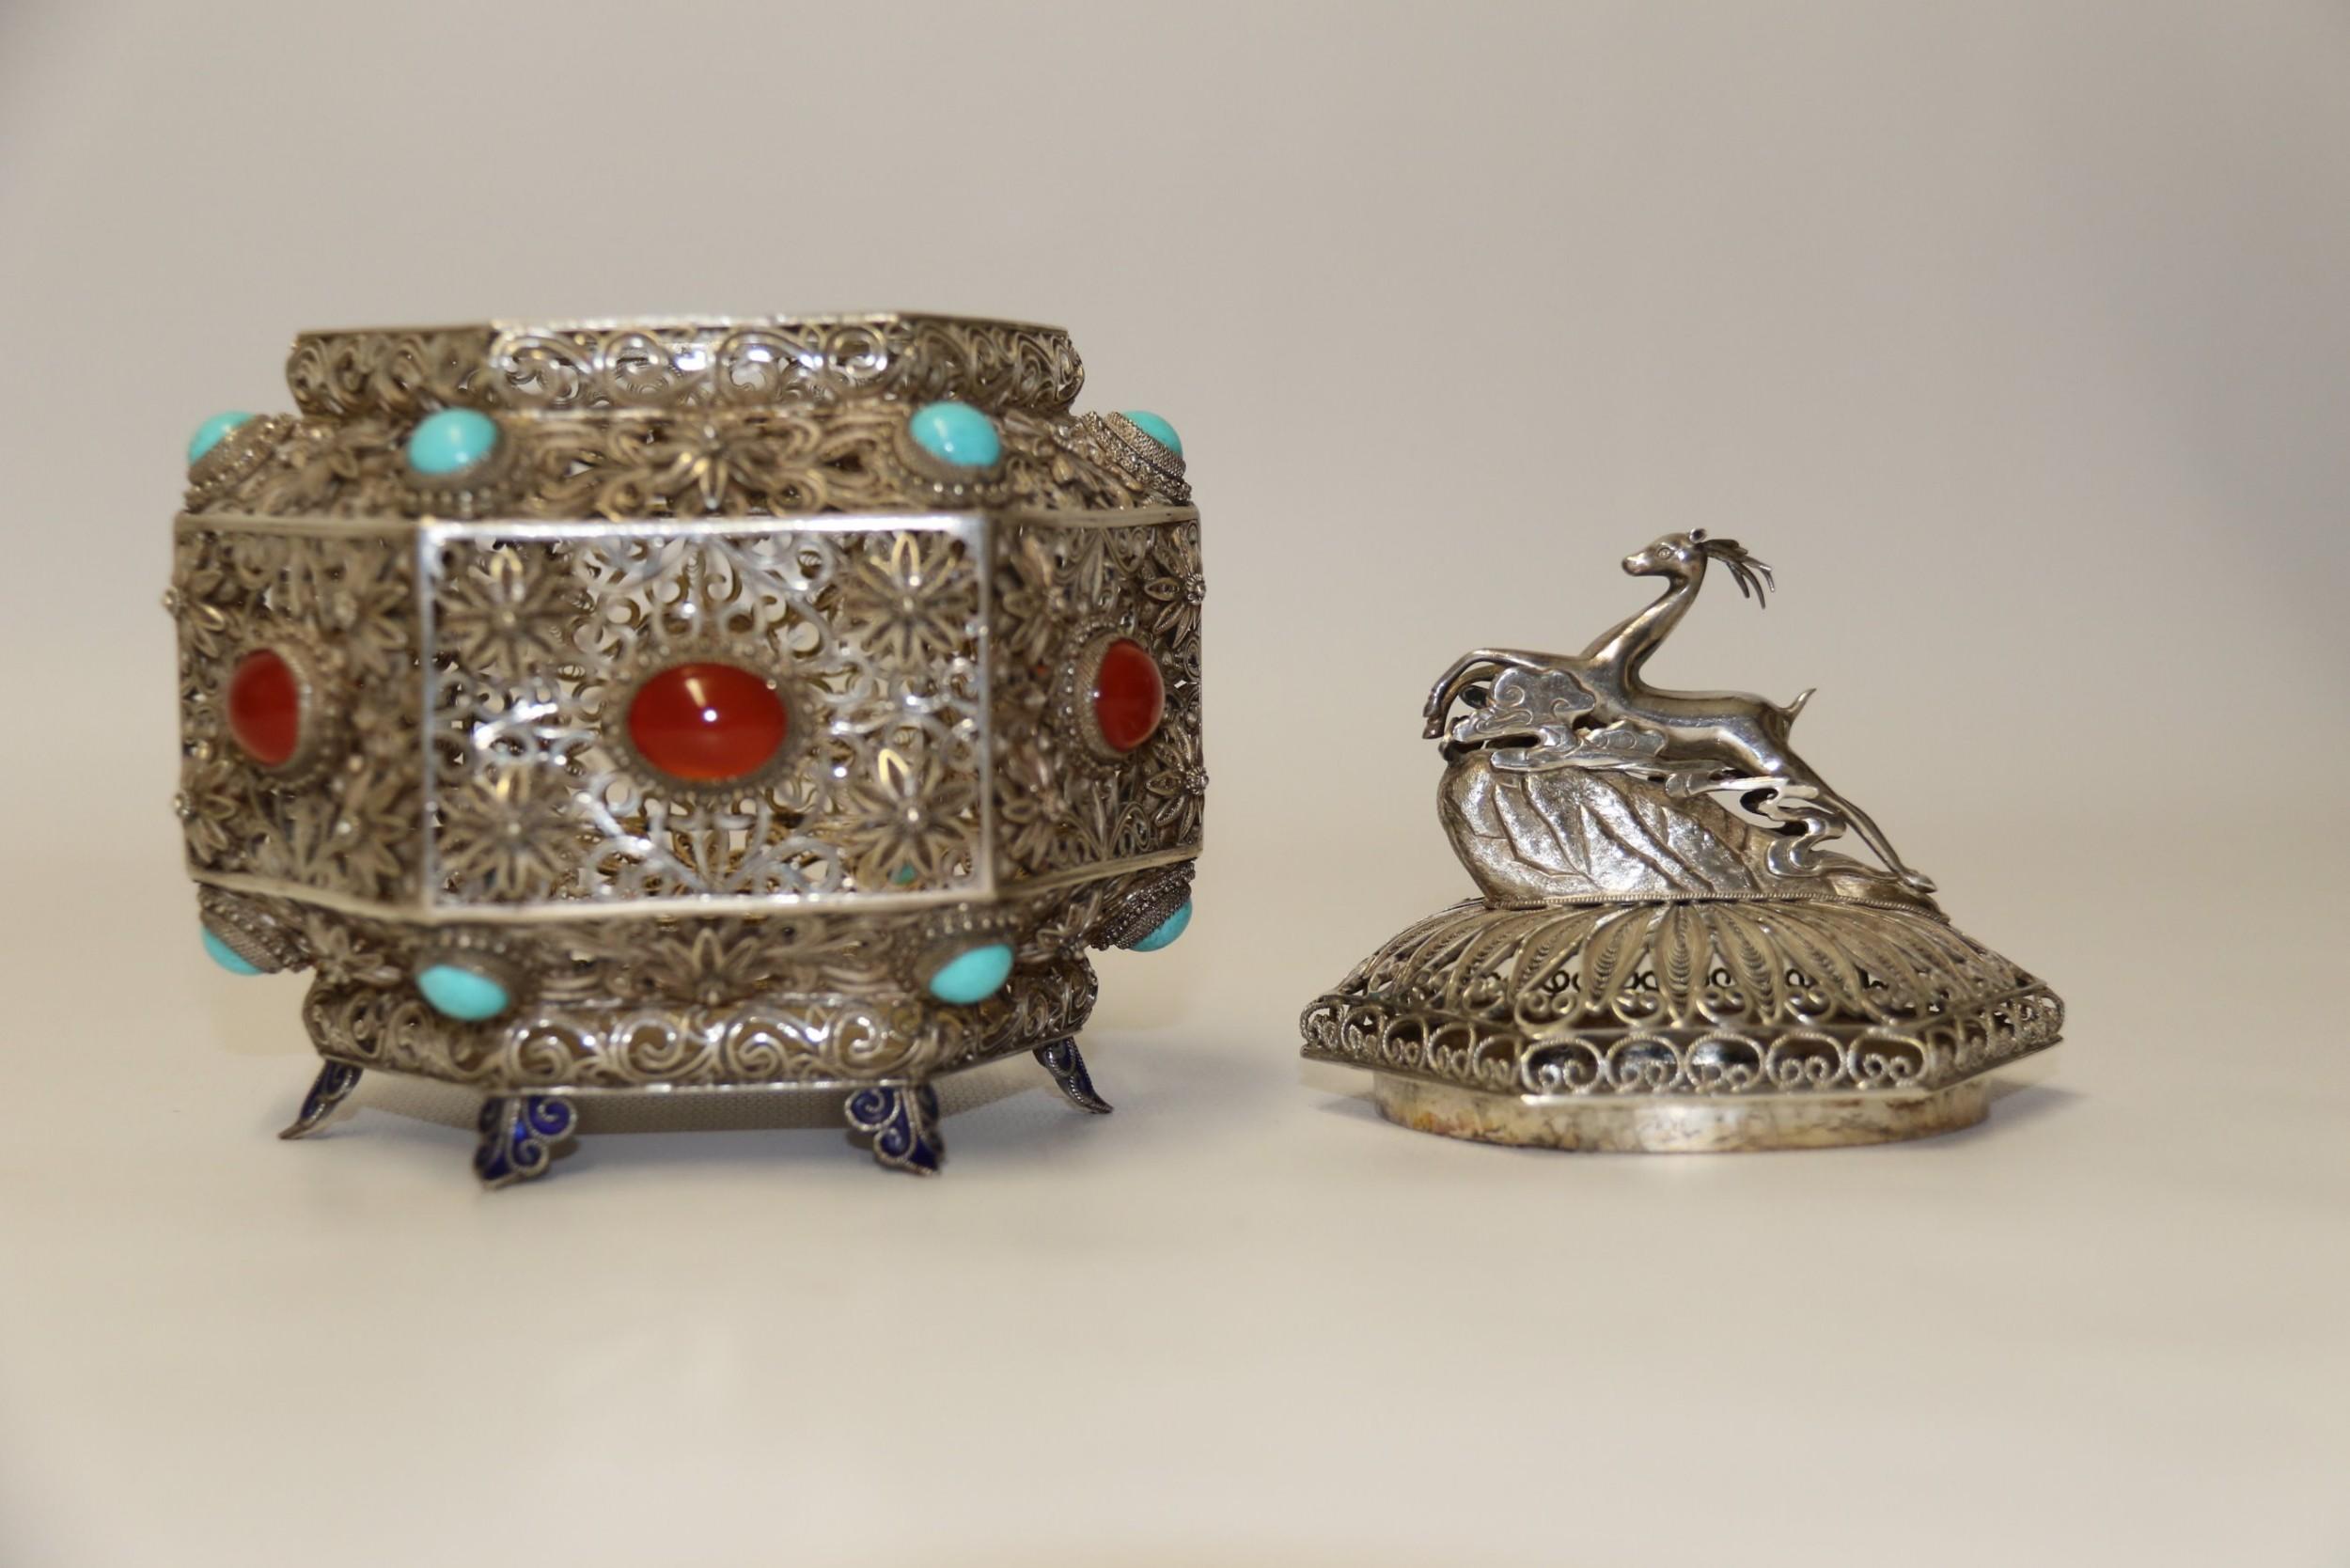 19th Century Indian Silver Filigree Work Incense Burner with Mounted Cabochons For Sale 15